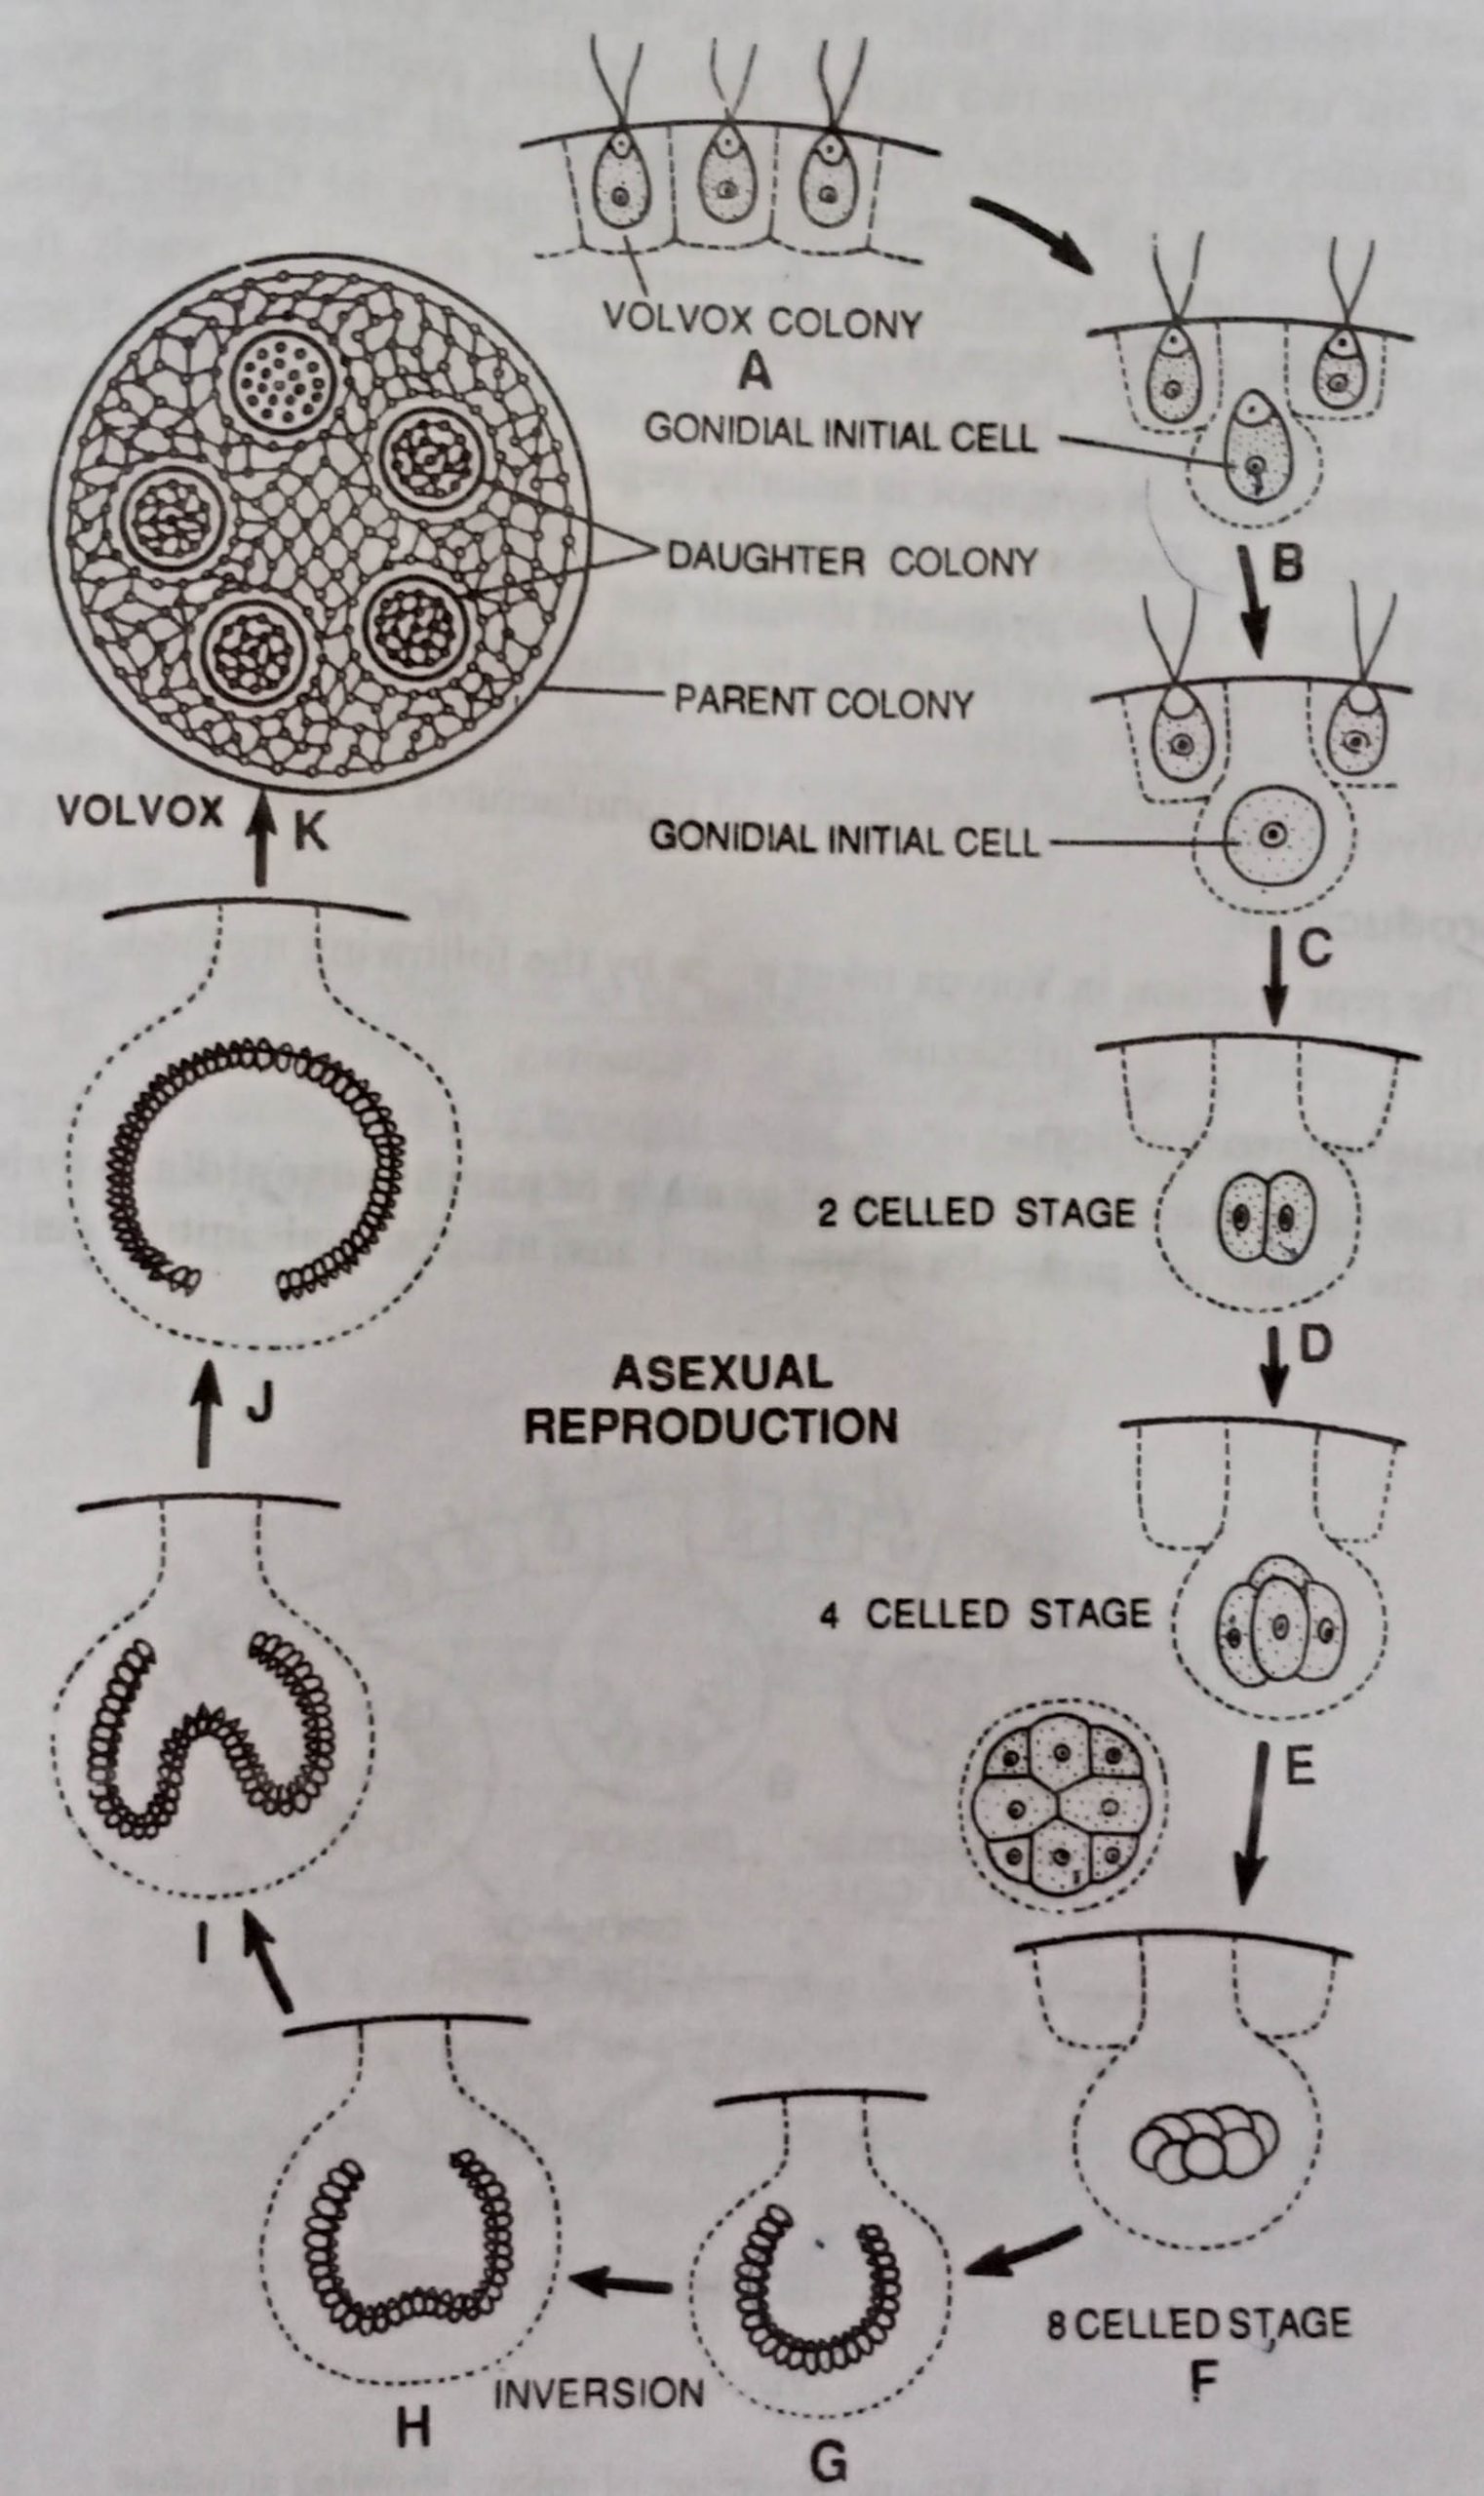 Asexual reproduction in Volvex by gonidia formation